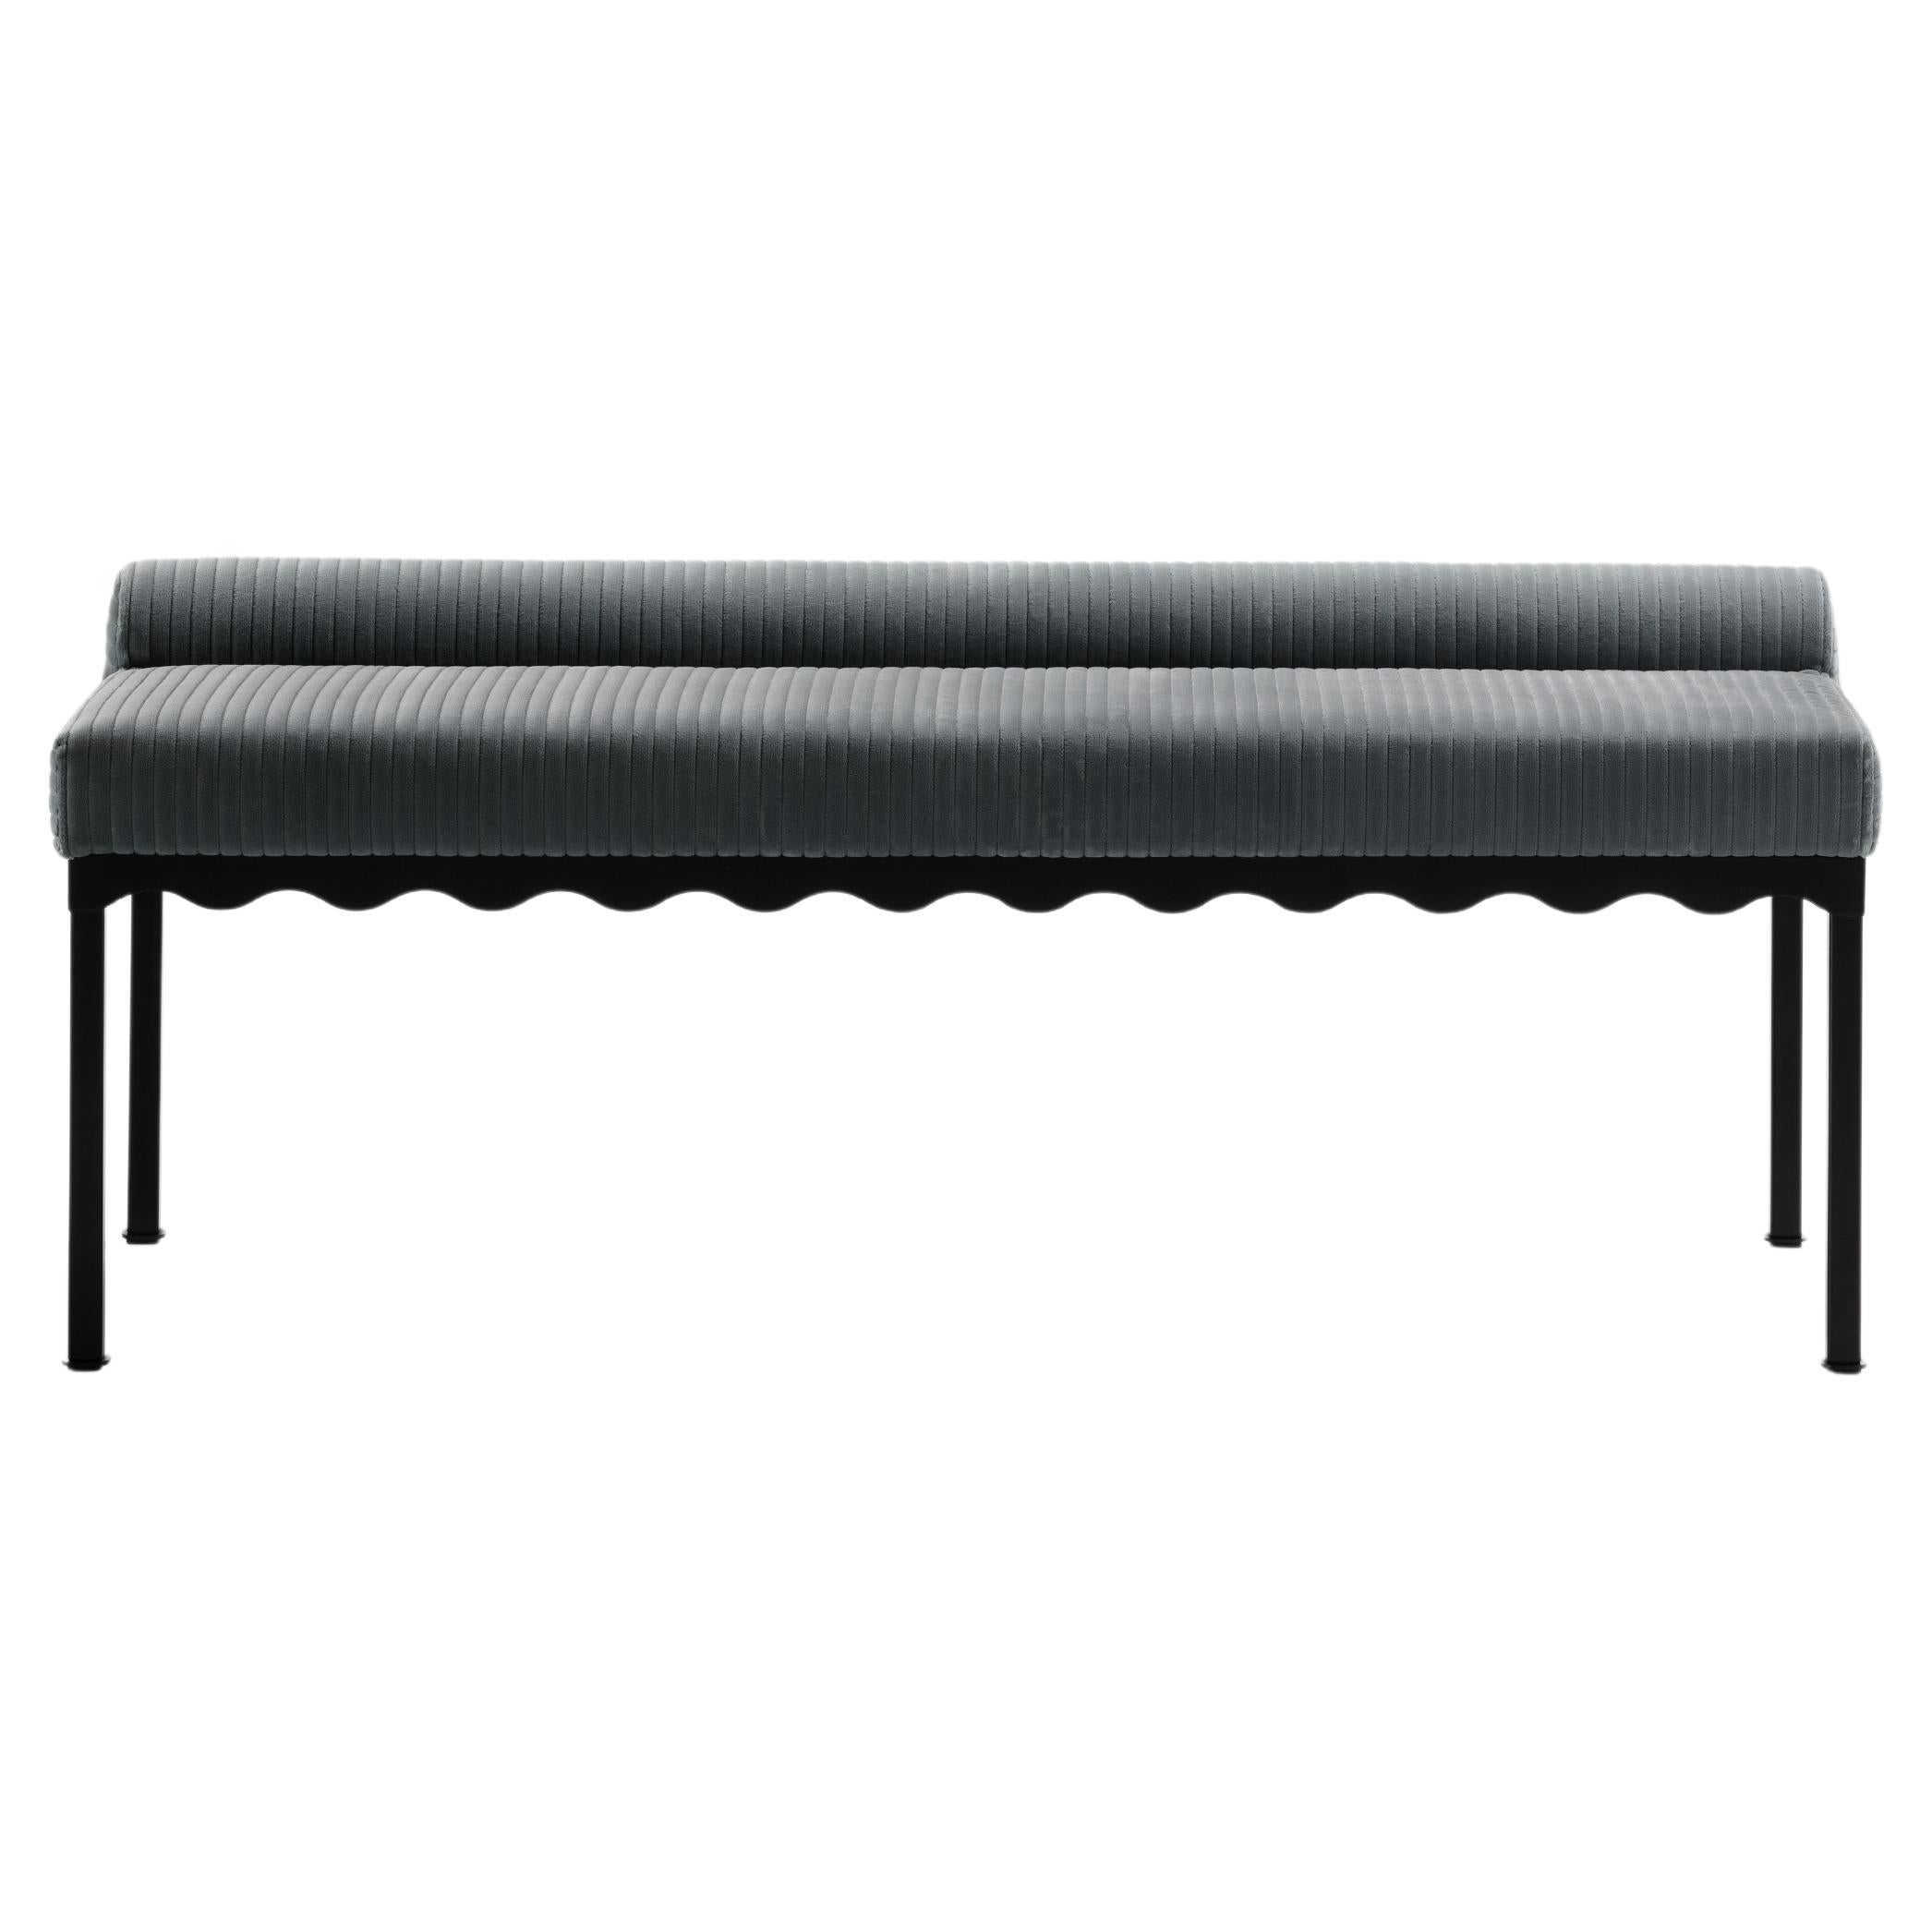 Marmoset Bellini 1340 Bench by Coco Flip For Sale